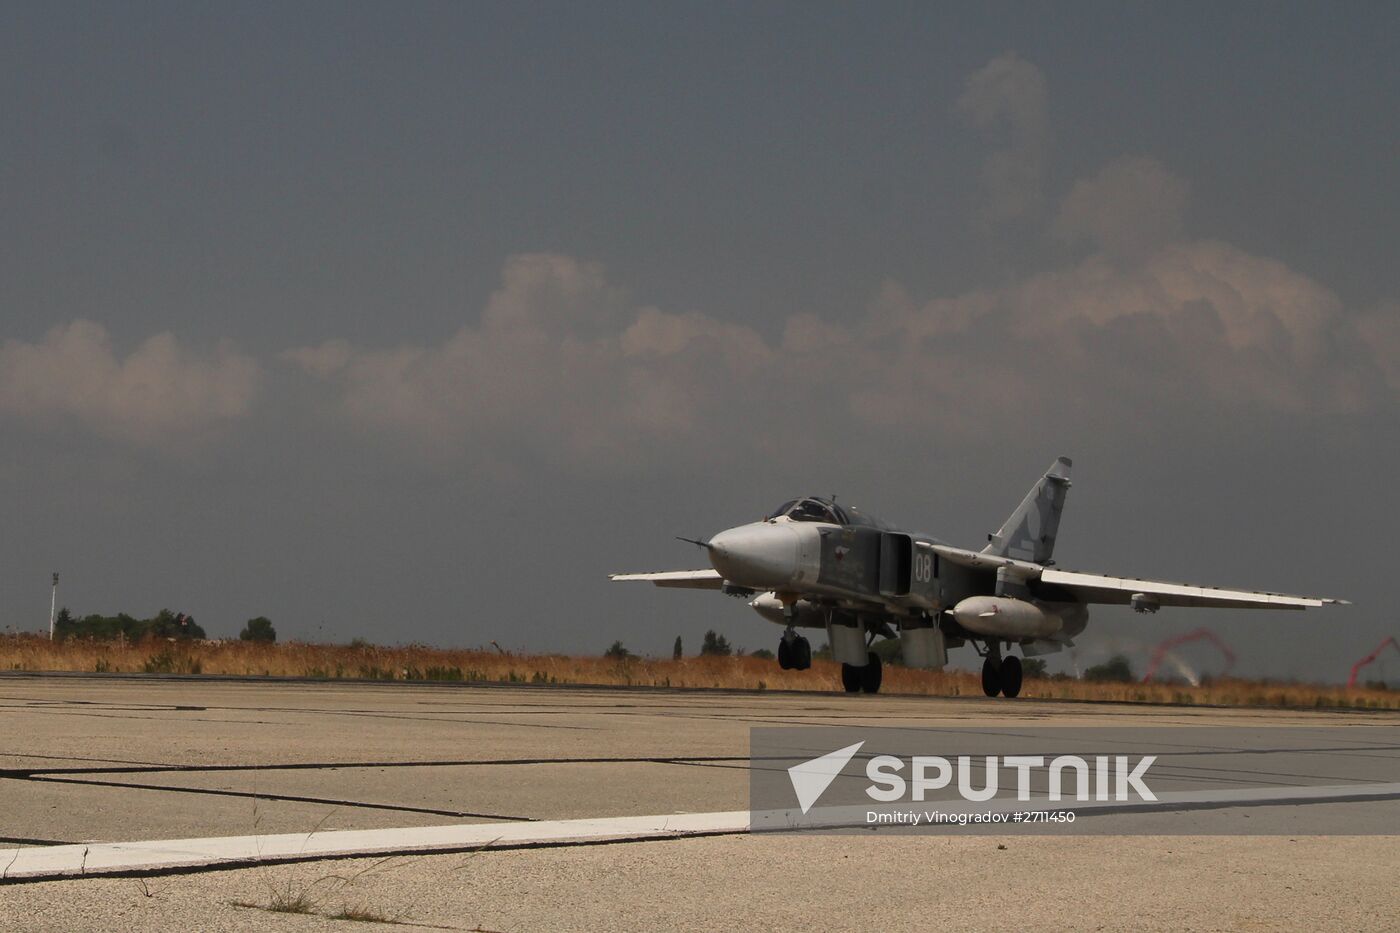 Russian war planes at Hmeimim base in Syria